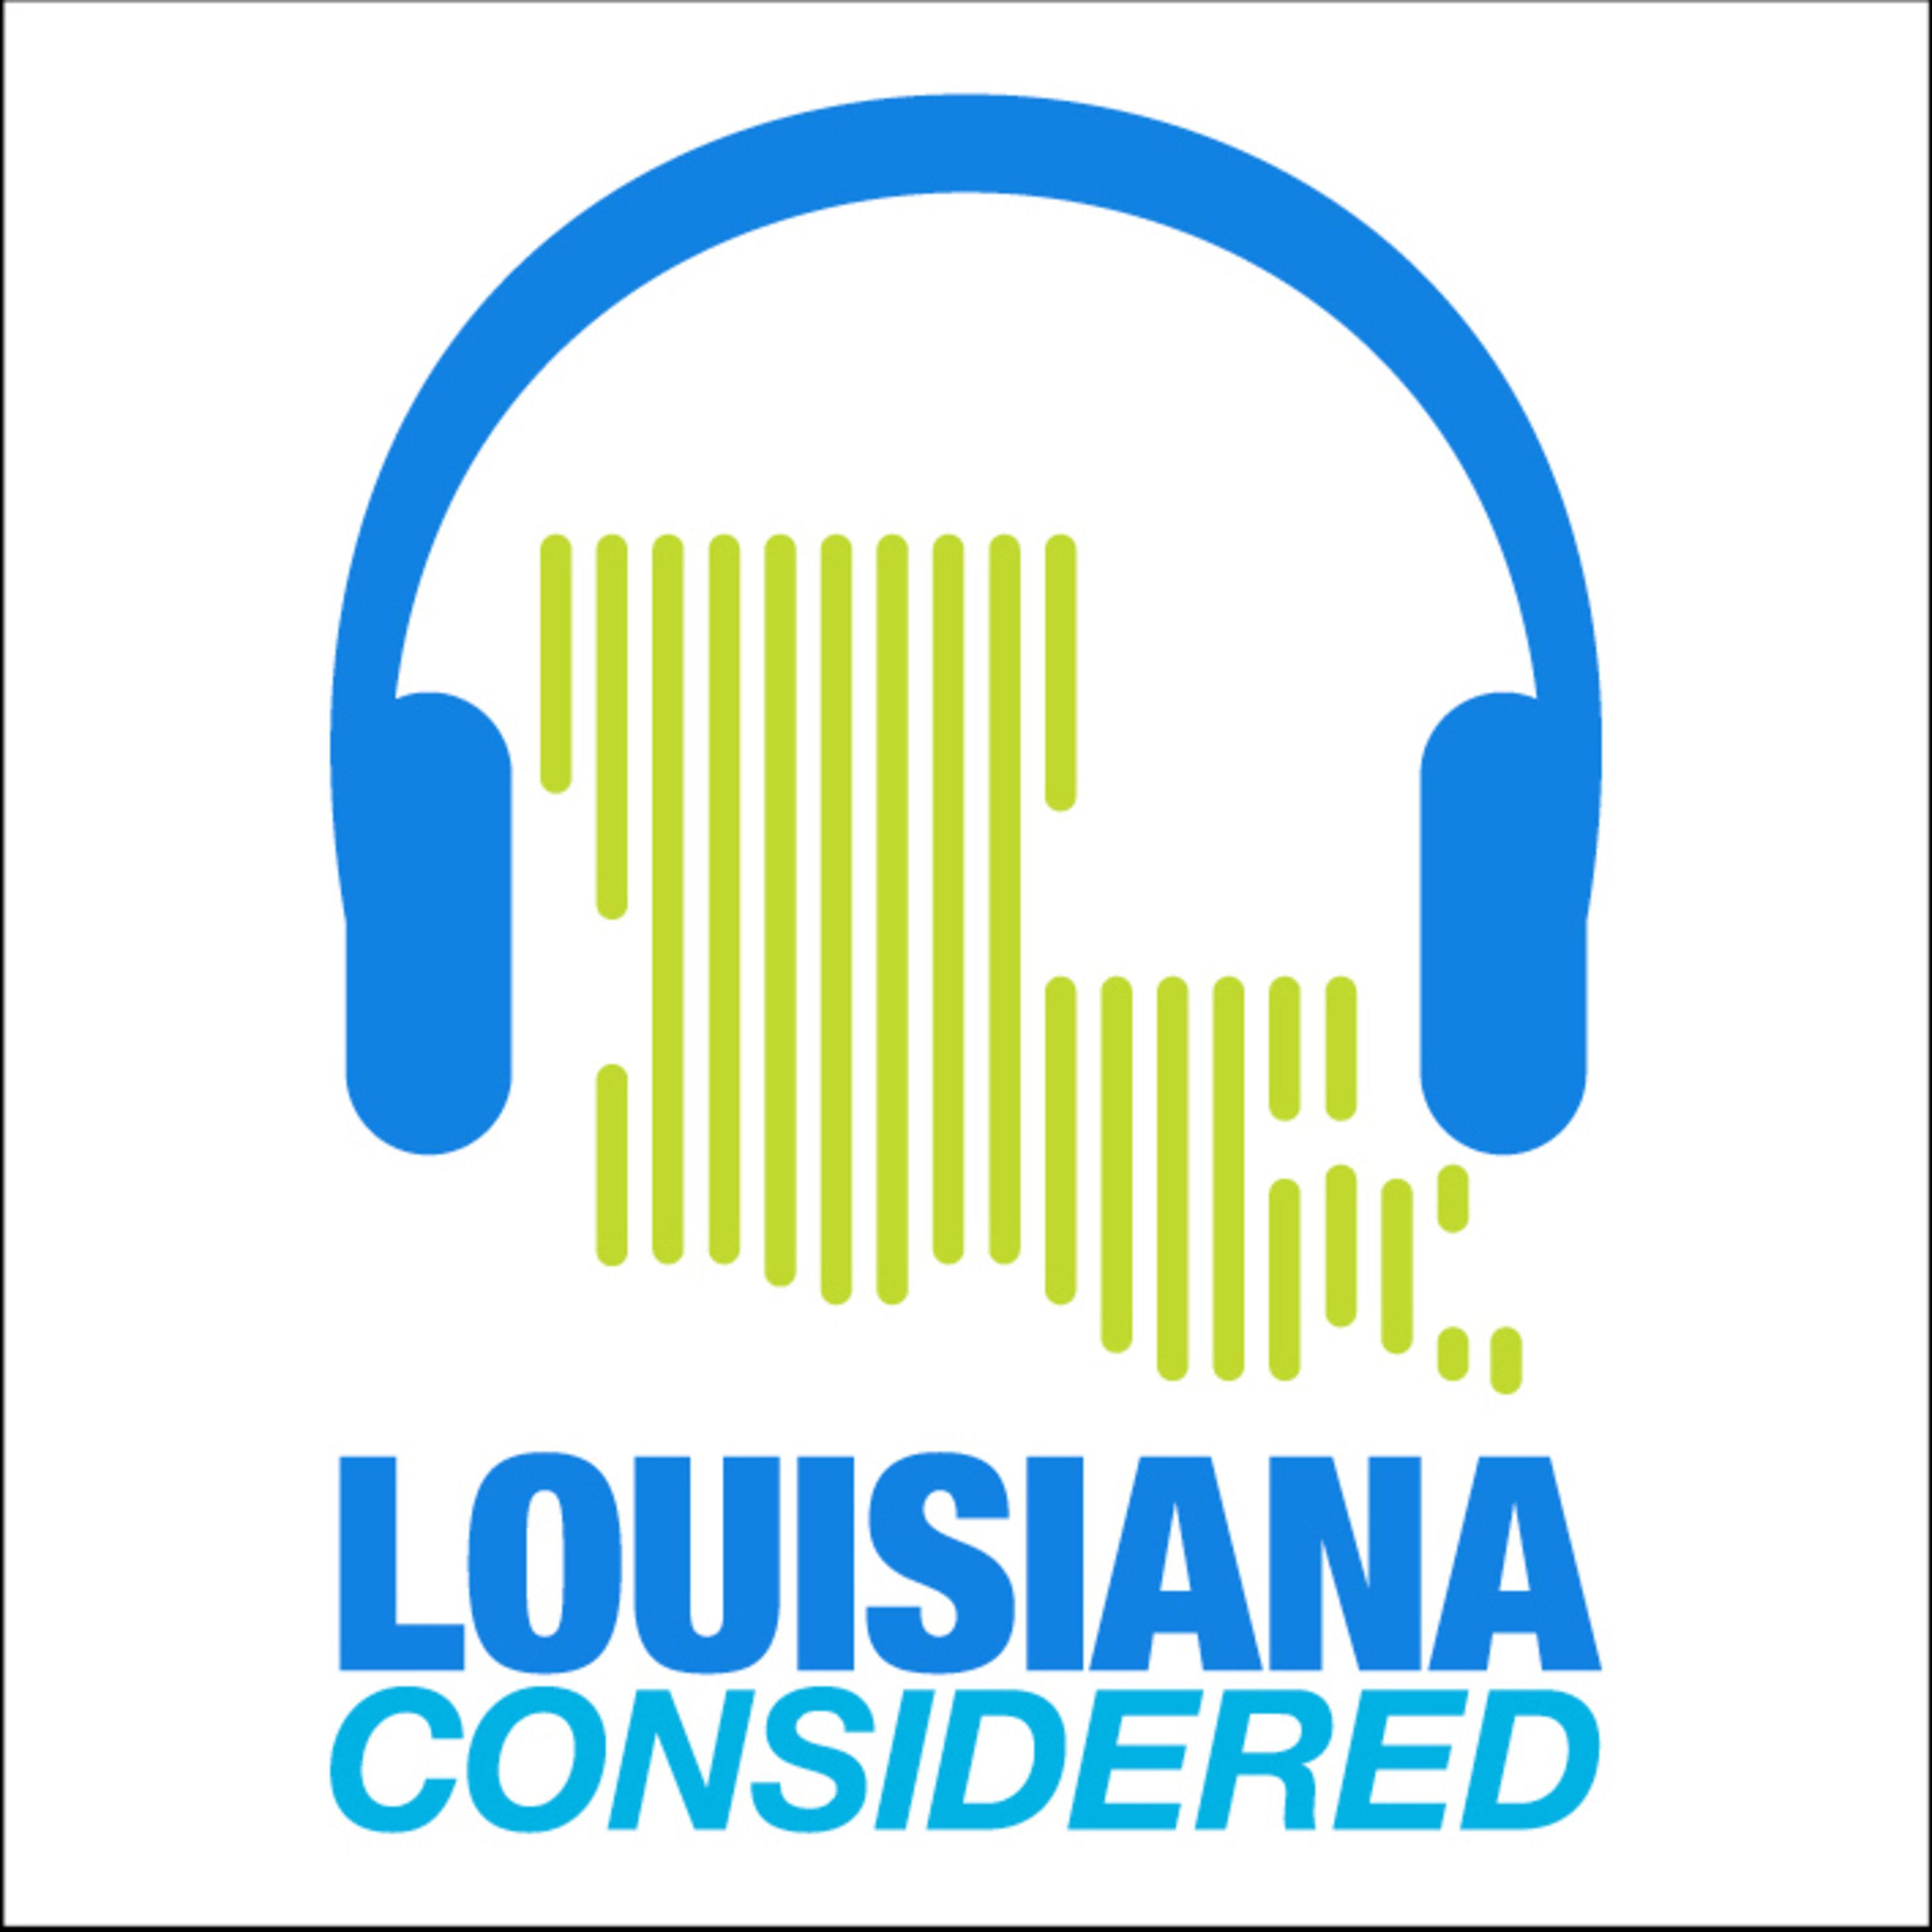 Thumbnail for "Louisiana Considered: Jefferson Parish Sheriff’s Office Under Scrutiny, Thousands Still Without Power 1 Month After Ida, Ivory-Billed Woodpecker Declared Extinct".